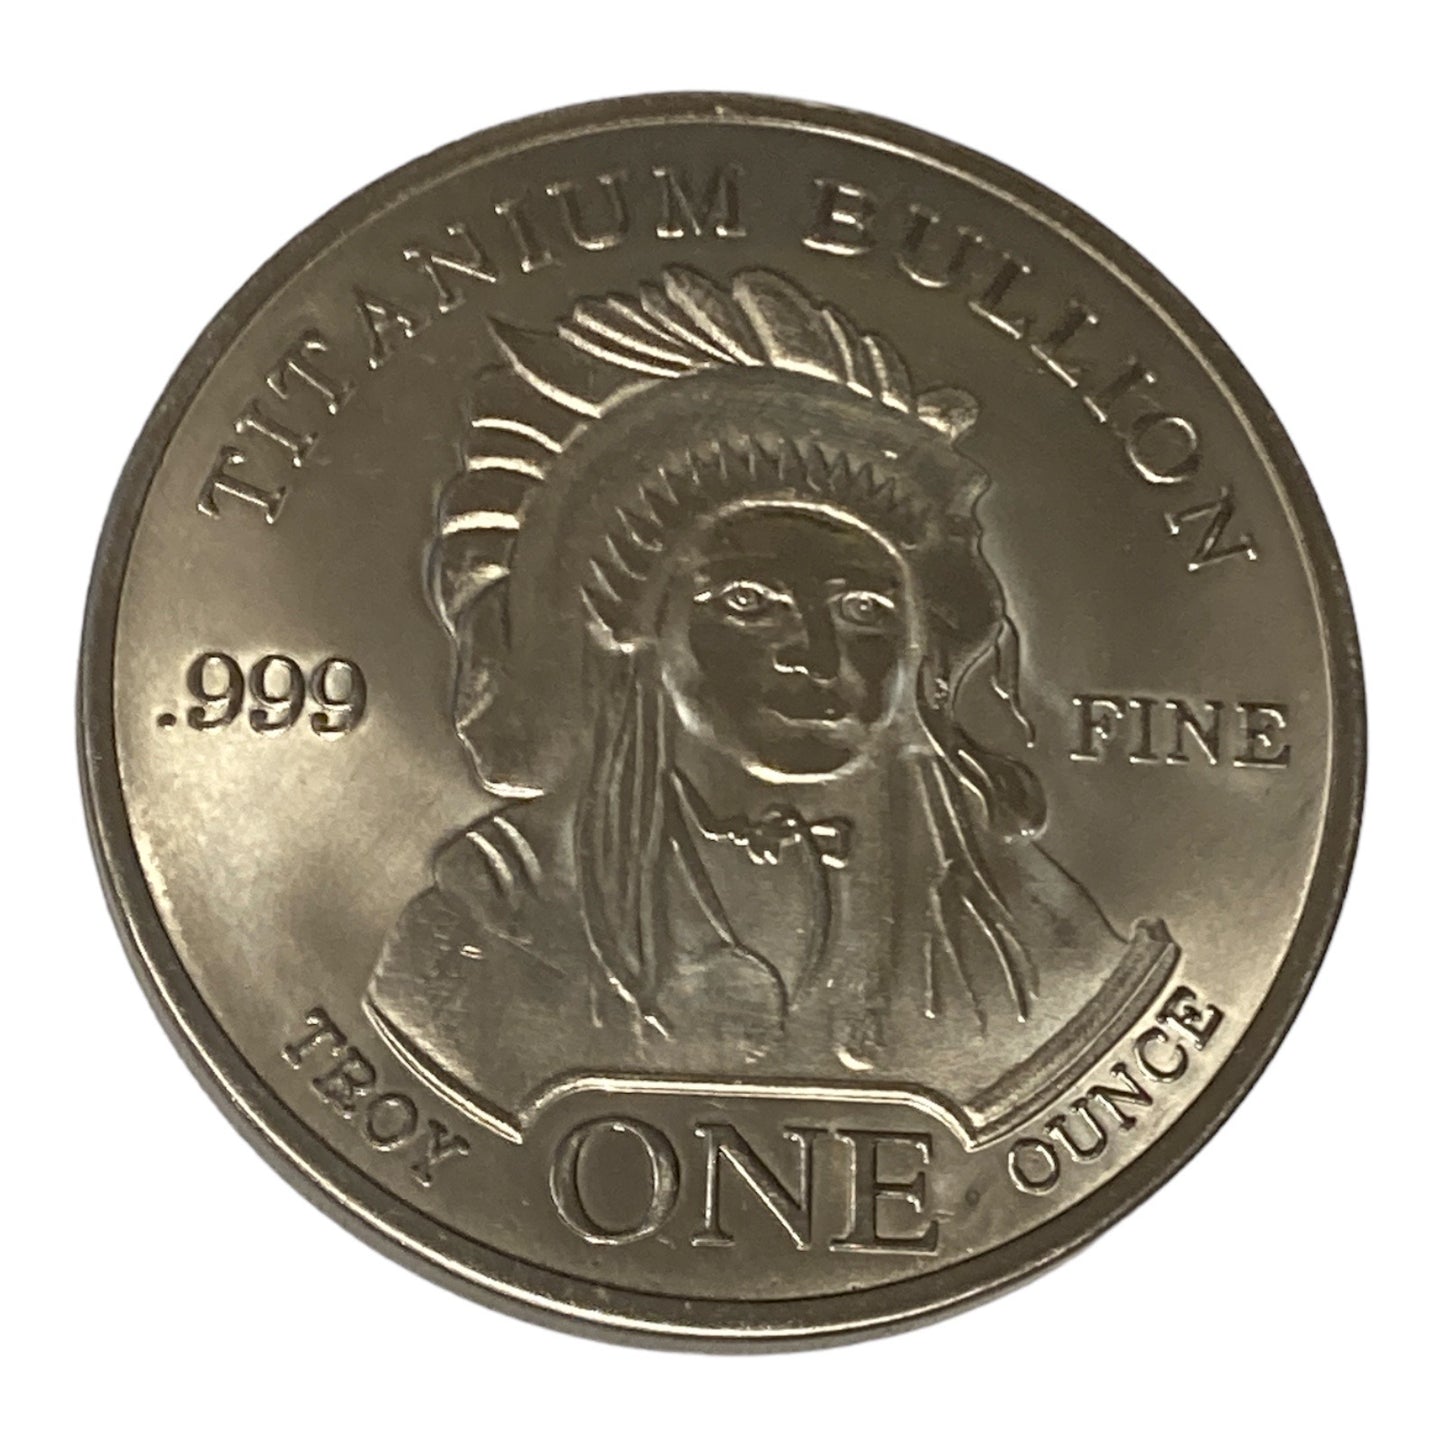 Indian Head with Buffalo - 1 Oz Titanium Round by Liberty Copper